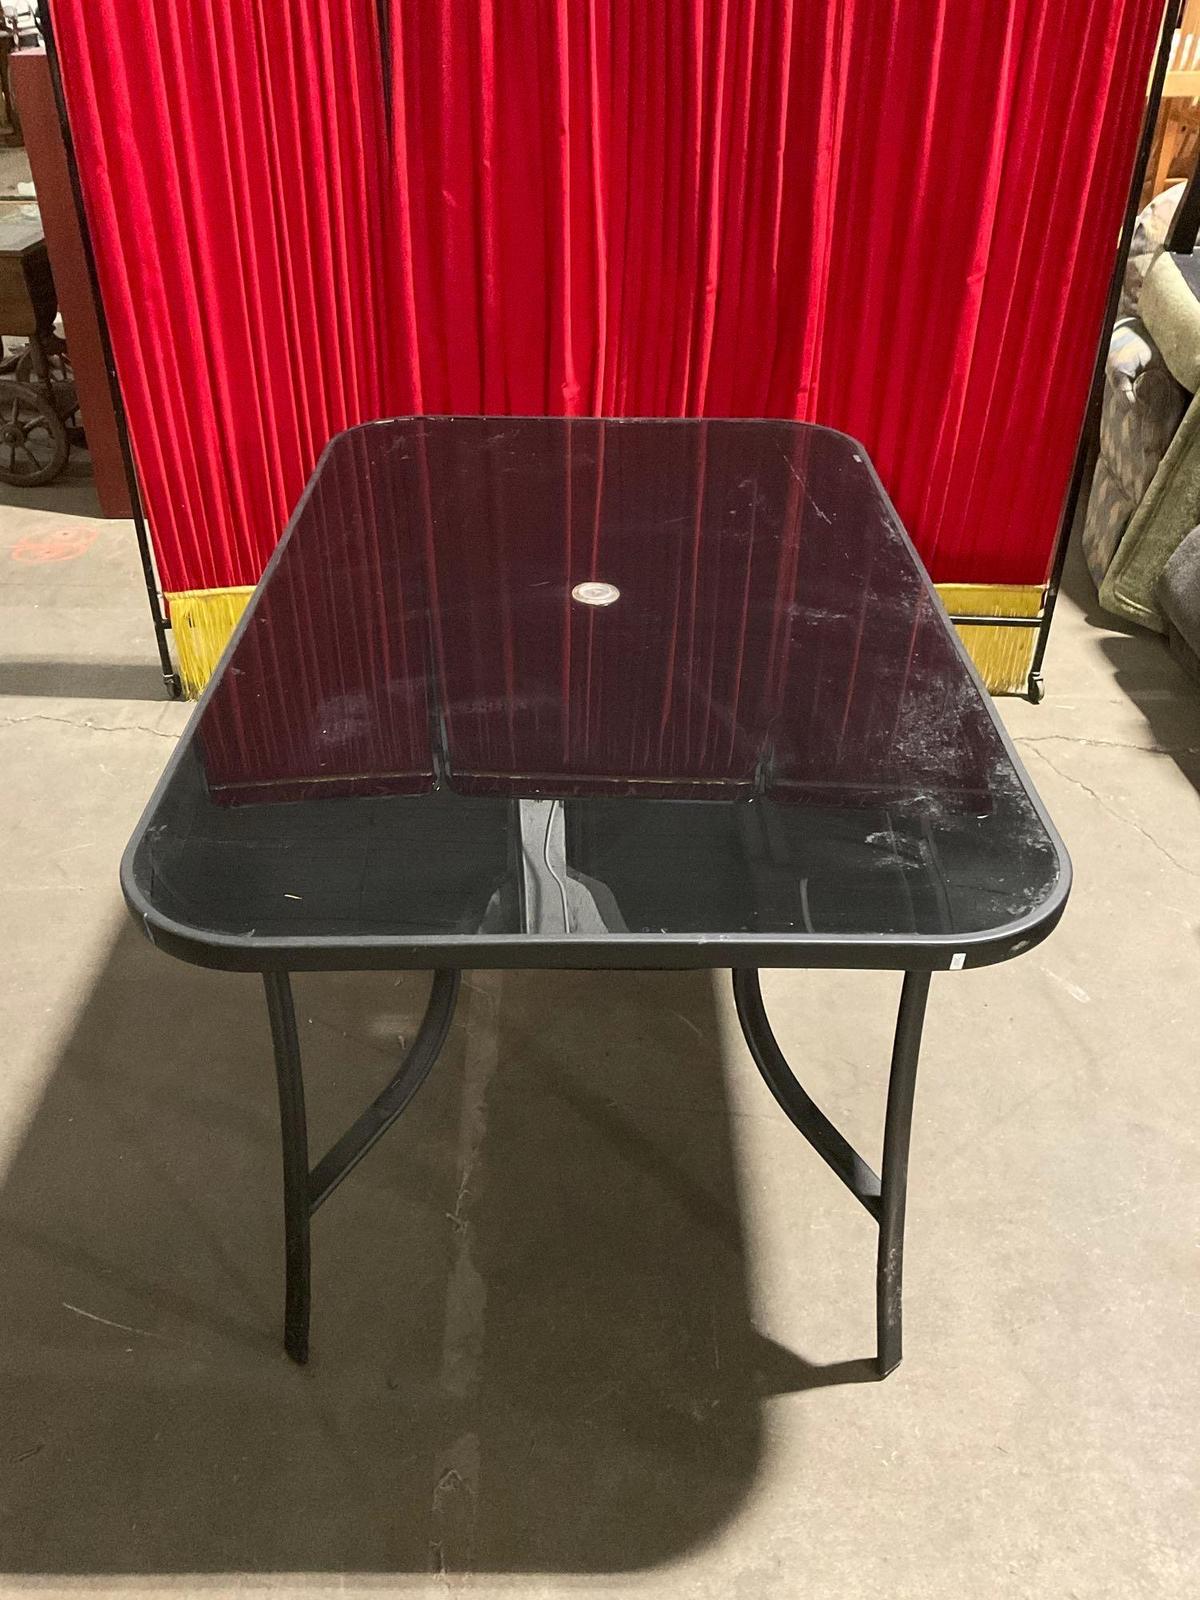 Nice Tempered Glass Metal Patio Table - In good Condition - Matches lot 54